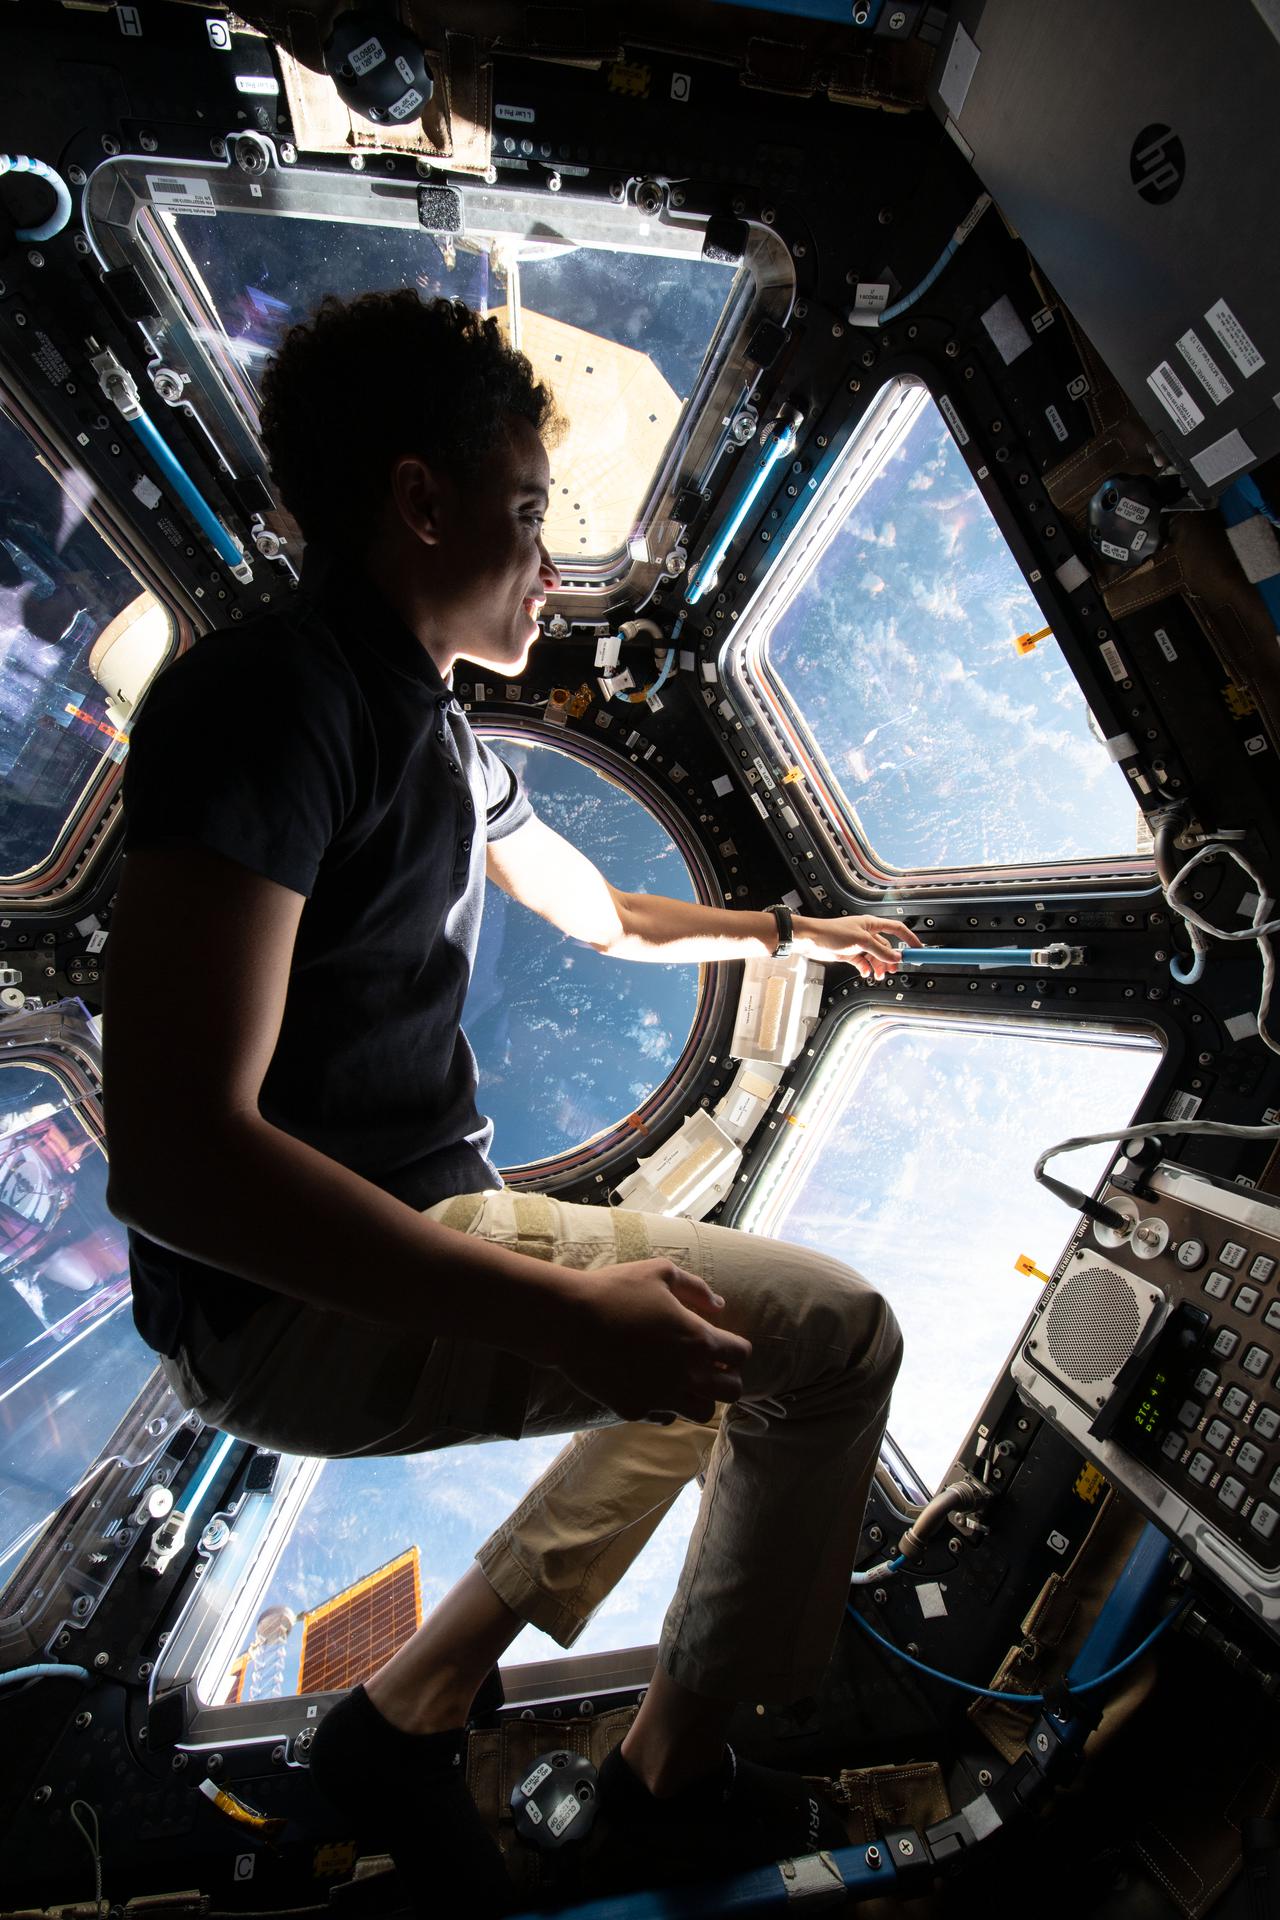 image of an astronaut gazing out the cupola windows enjoying the view of Earth